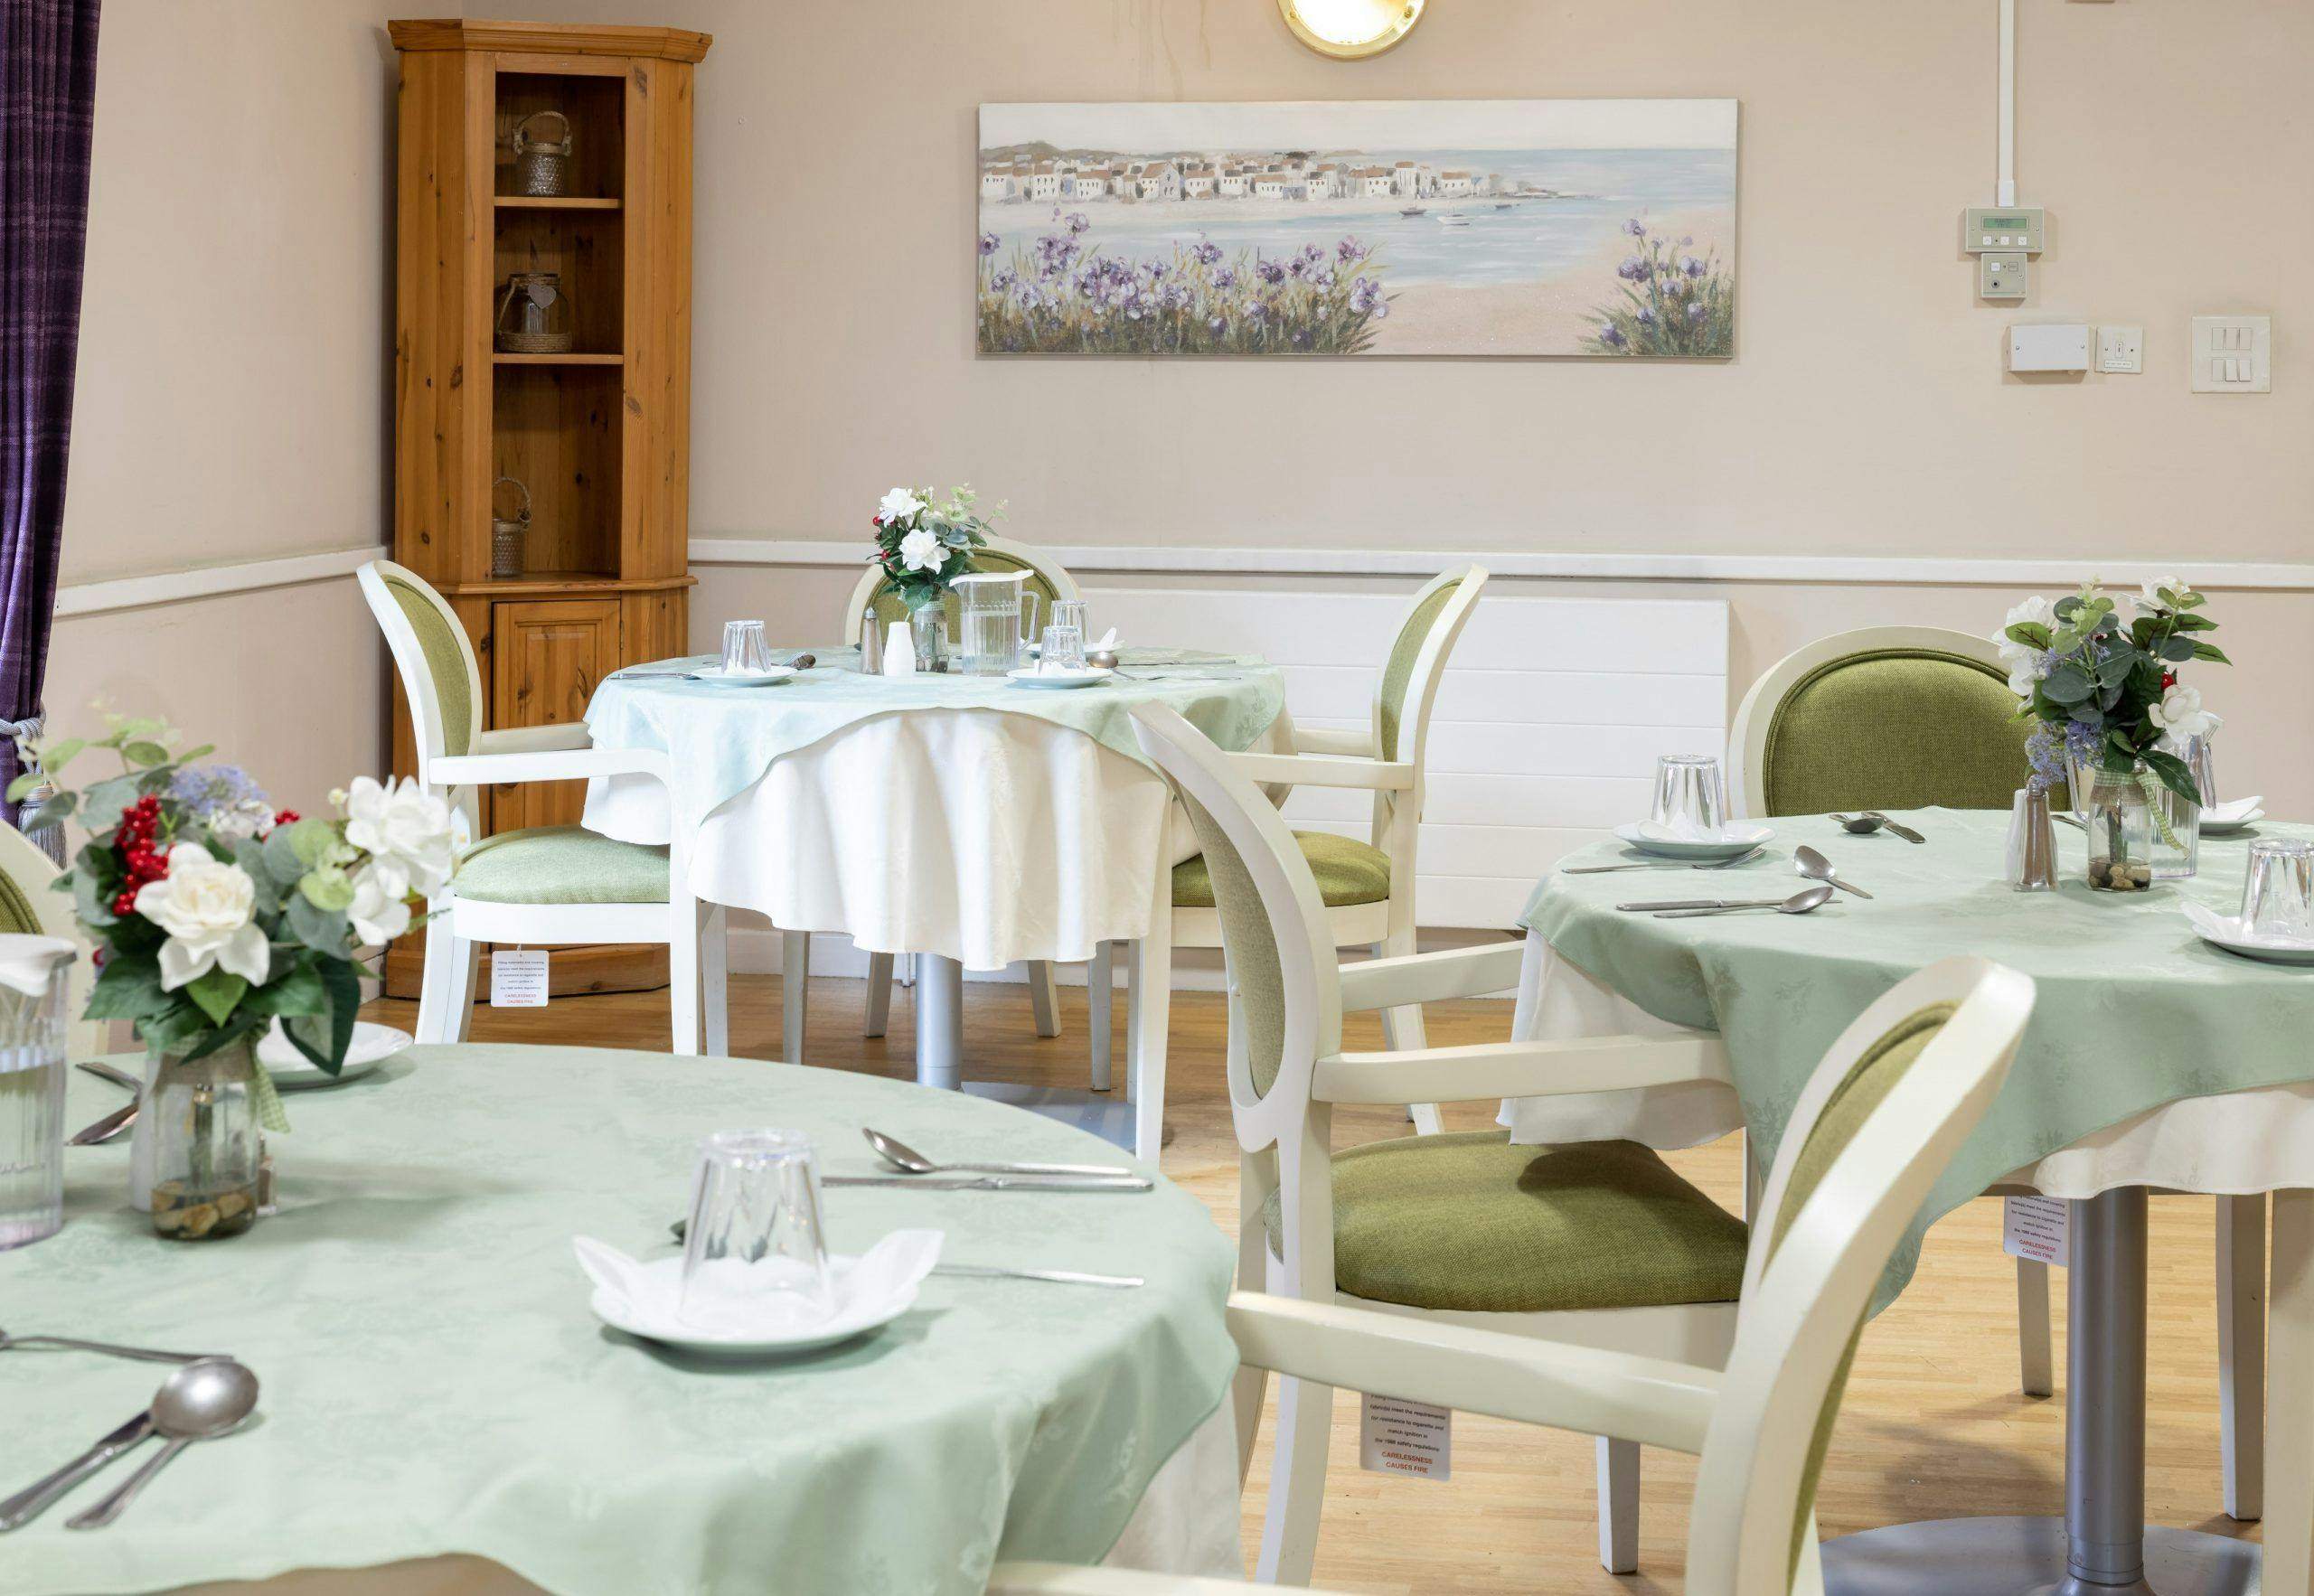 Dining room of Bod Hyfryd care home in Flint, Wales